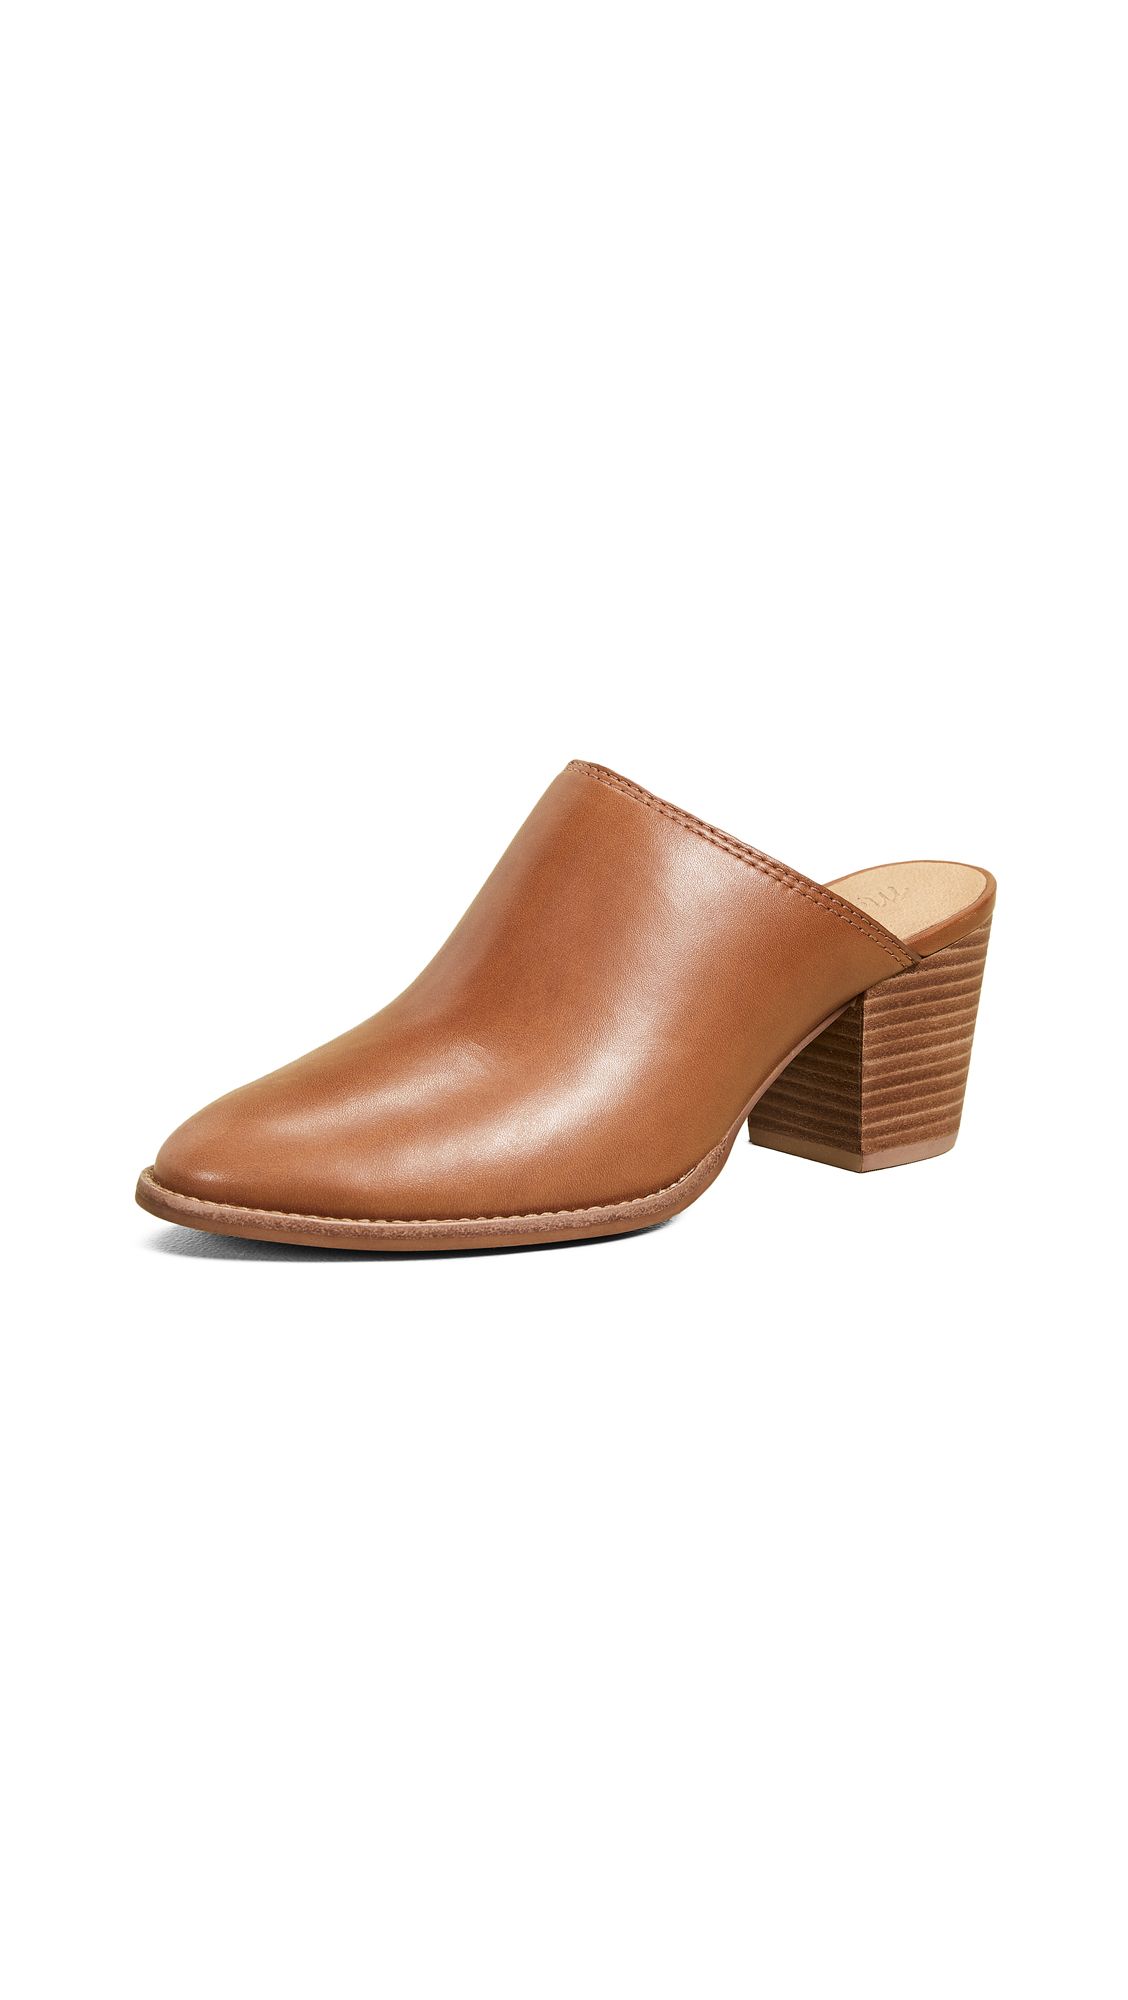 Madewell The Harper Mules | Shopbop